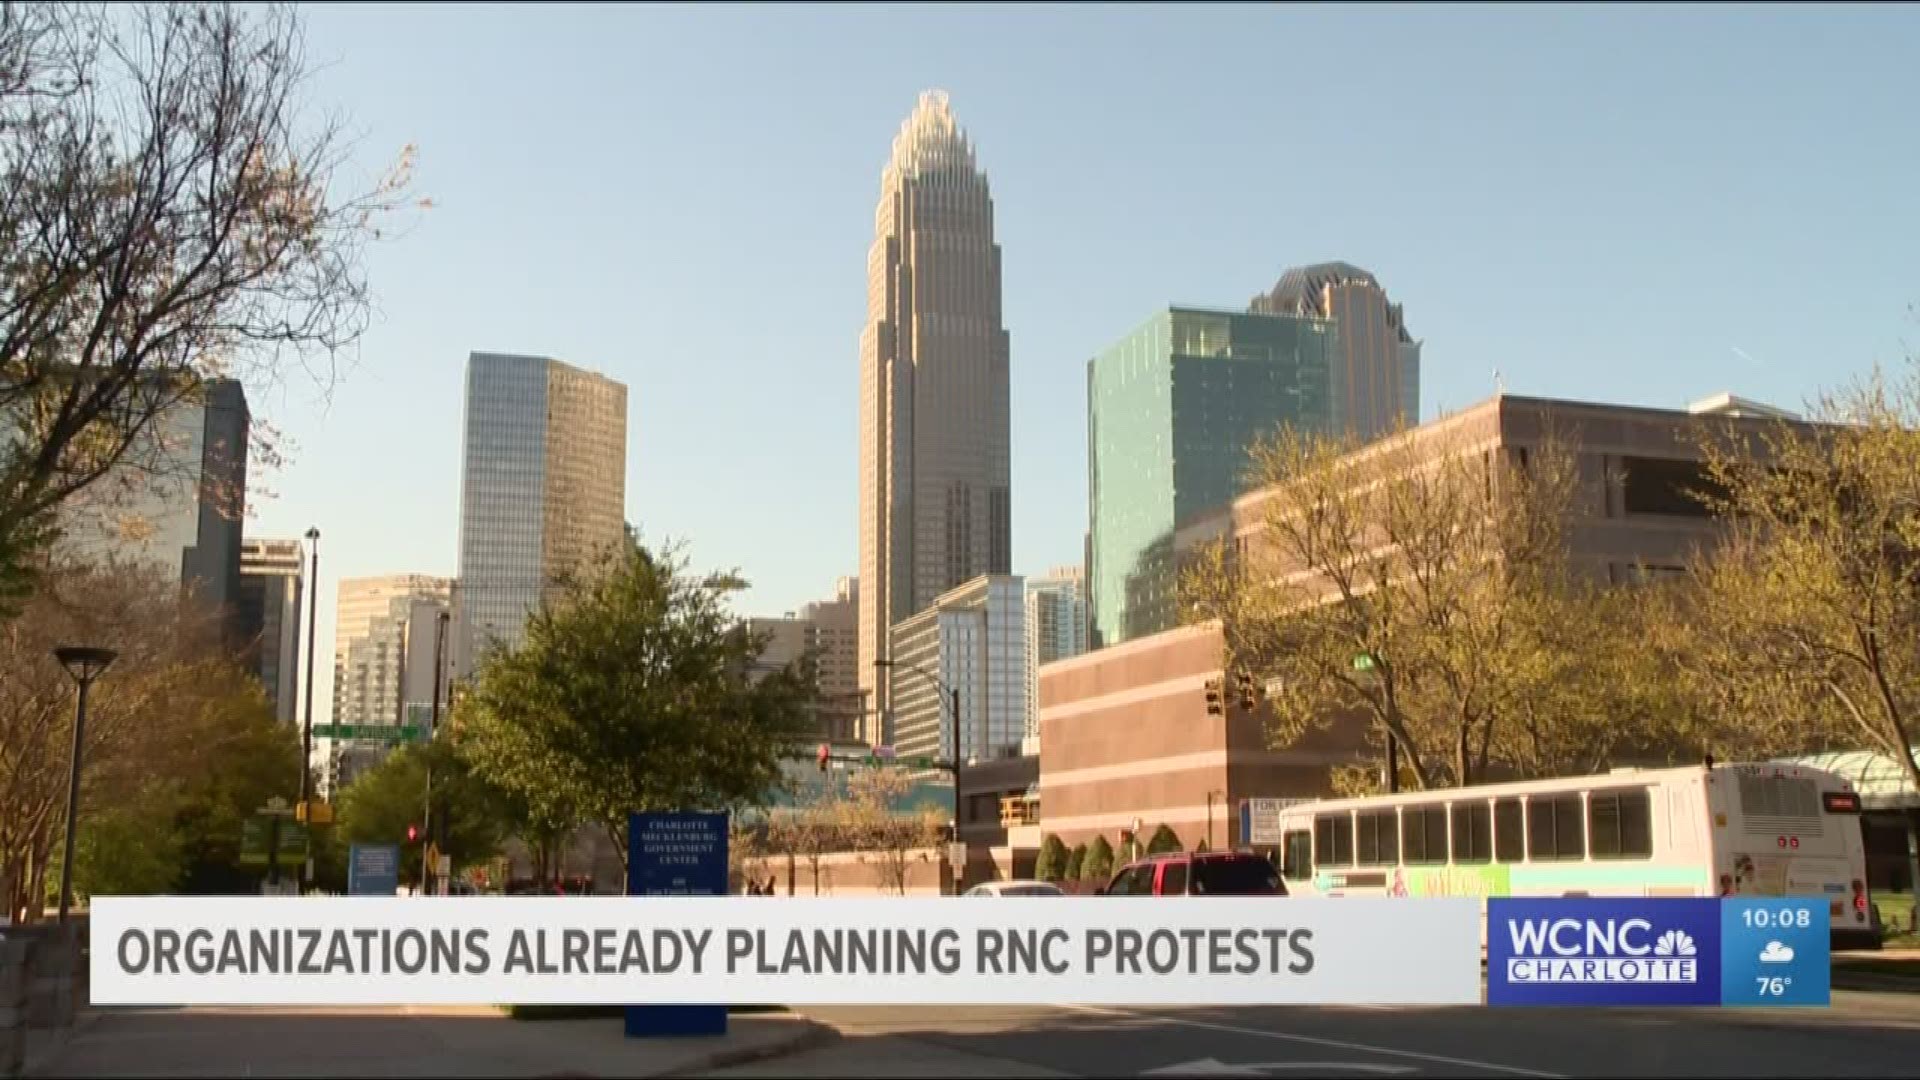 At least one hate group intends to be in Charlotte for the Republican National Convention. While some locally will protest, Love Charlotte has a different approach.